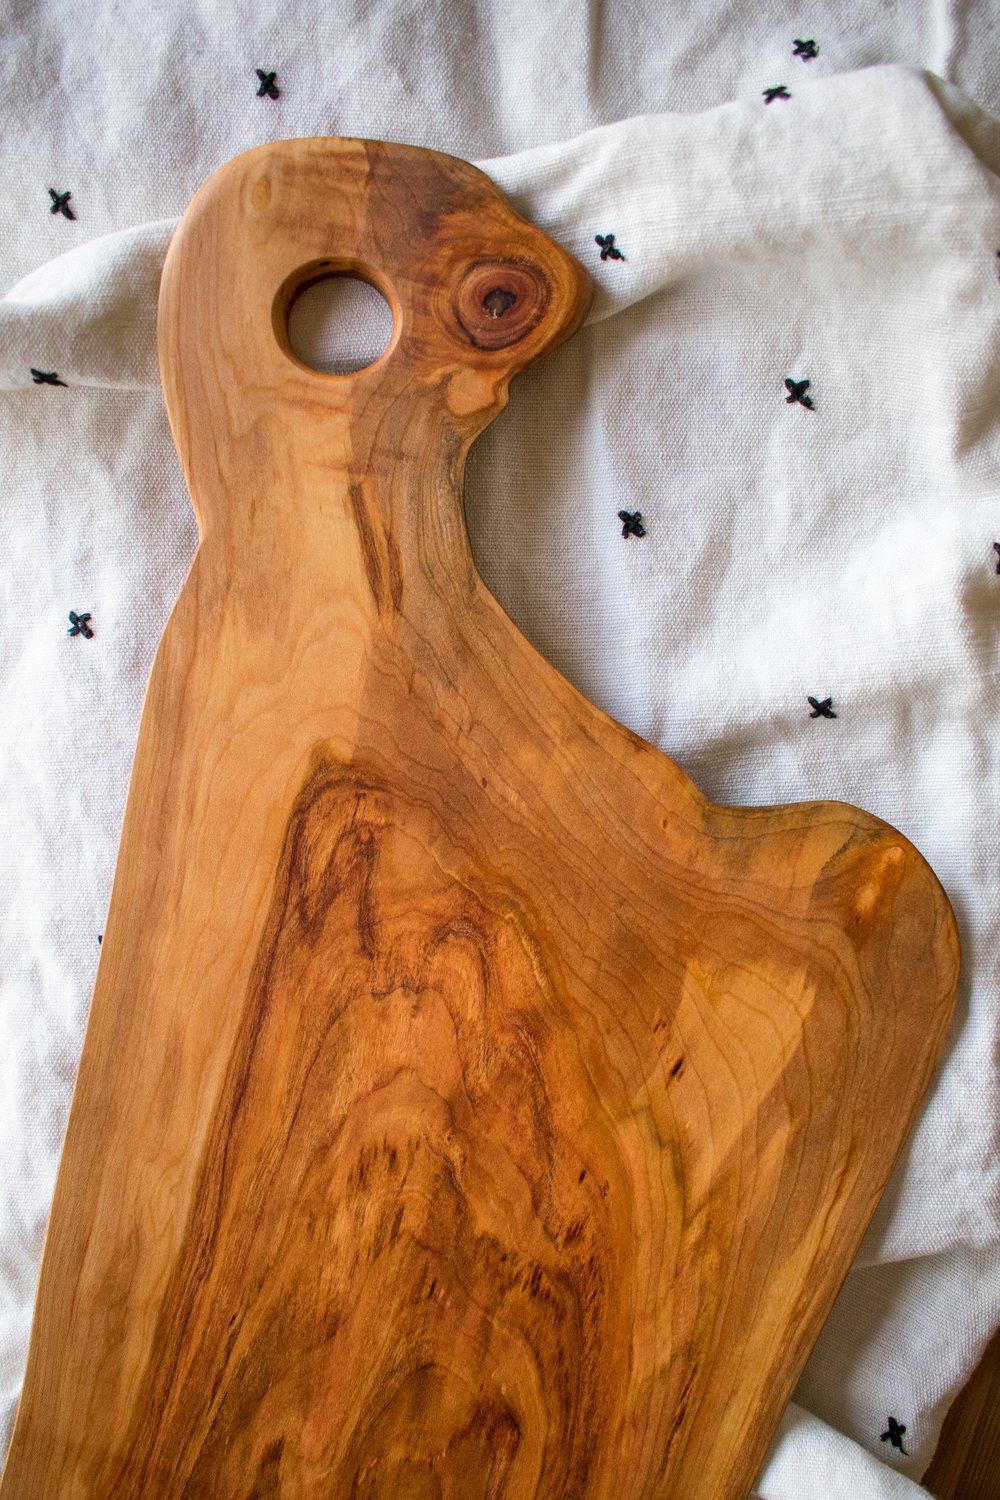 Carved Cherry Charcuterie/Cutting Board